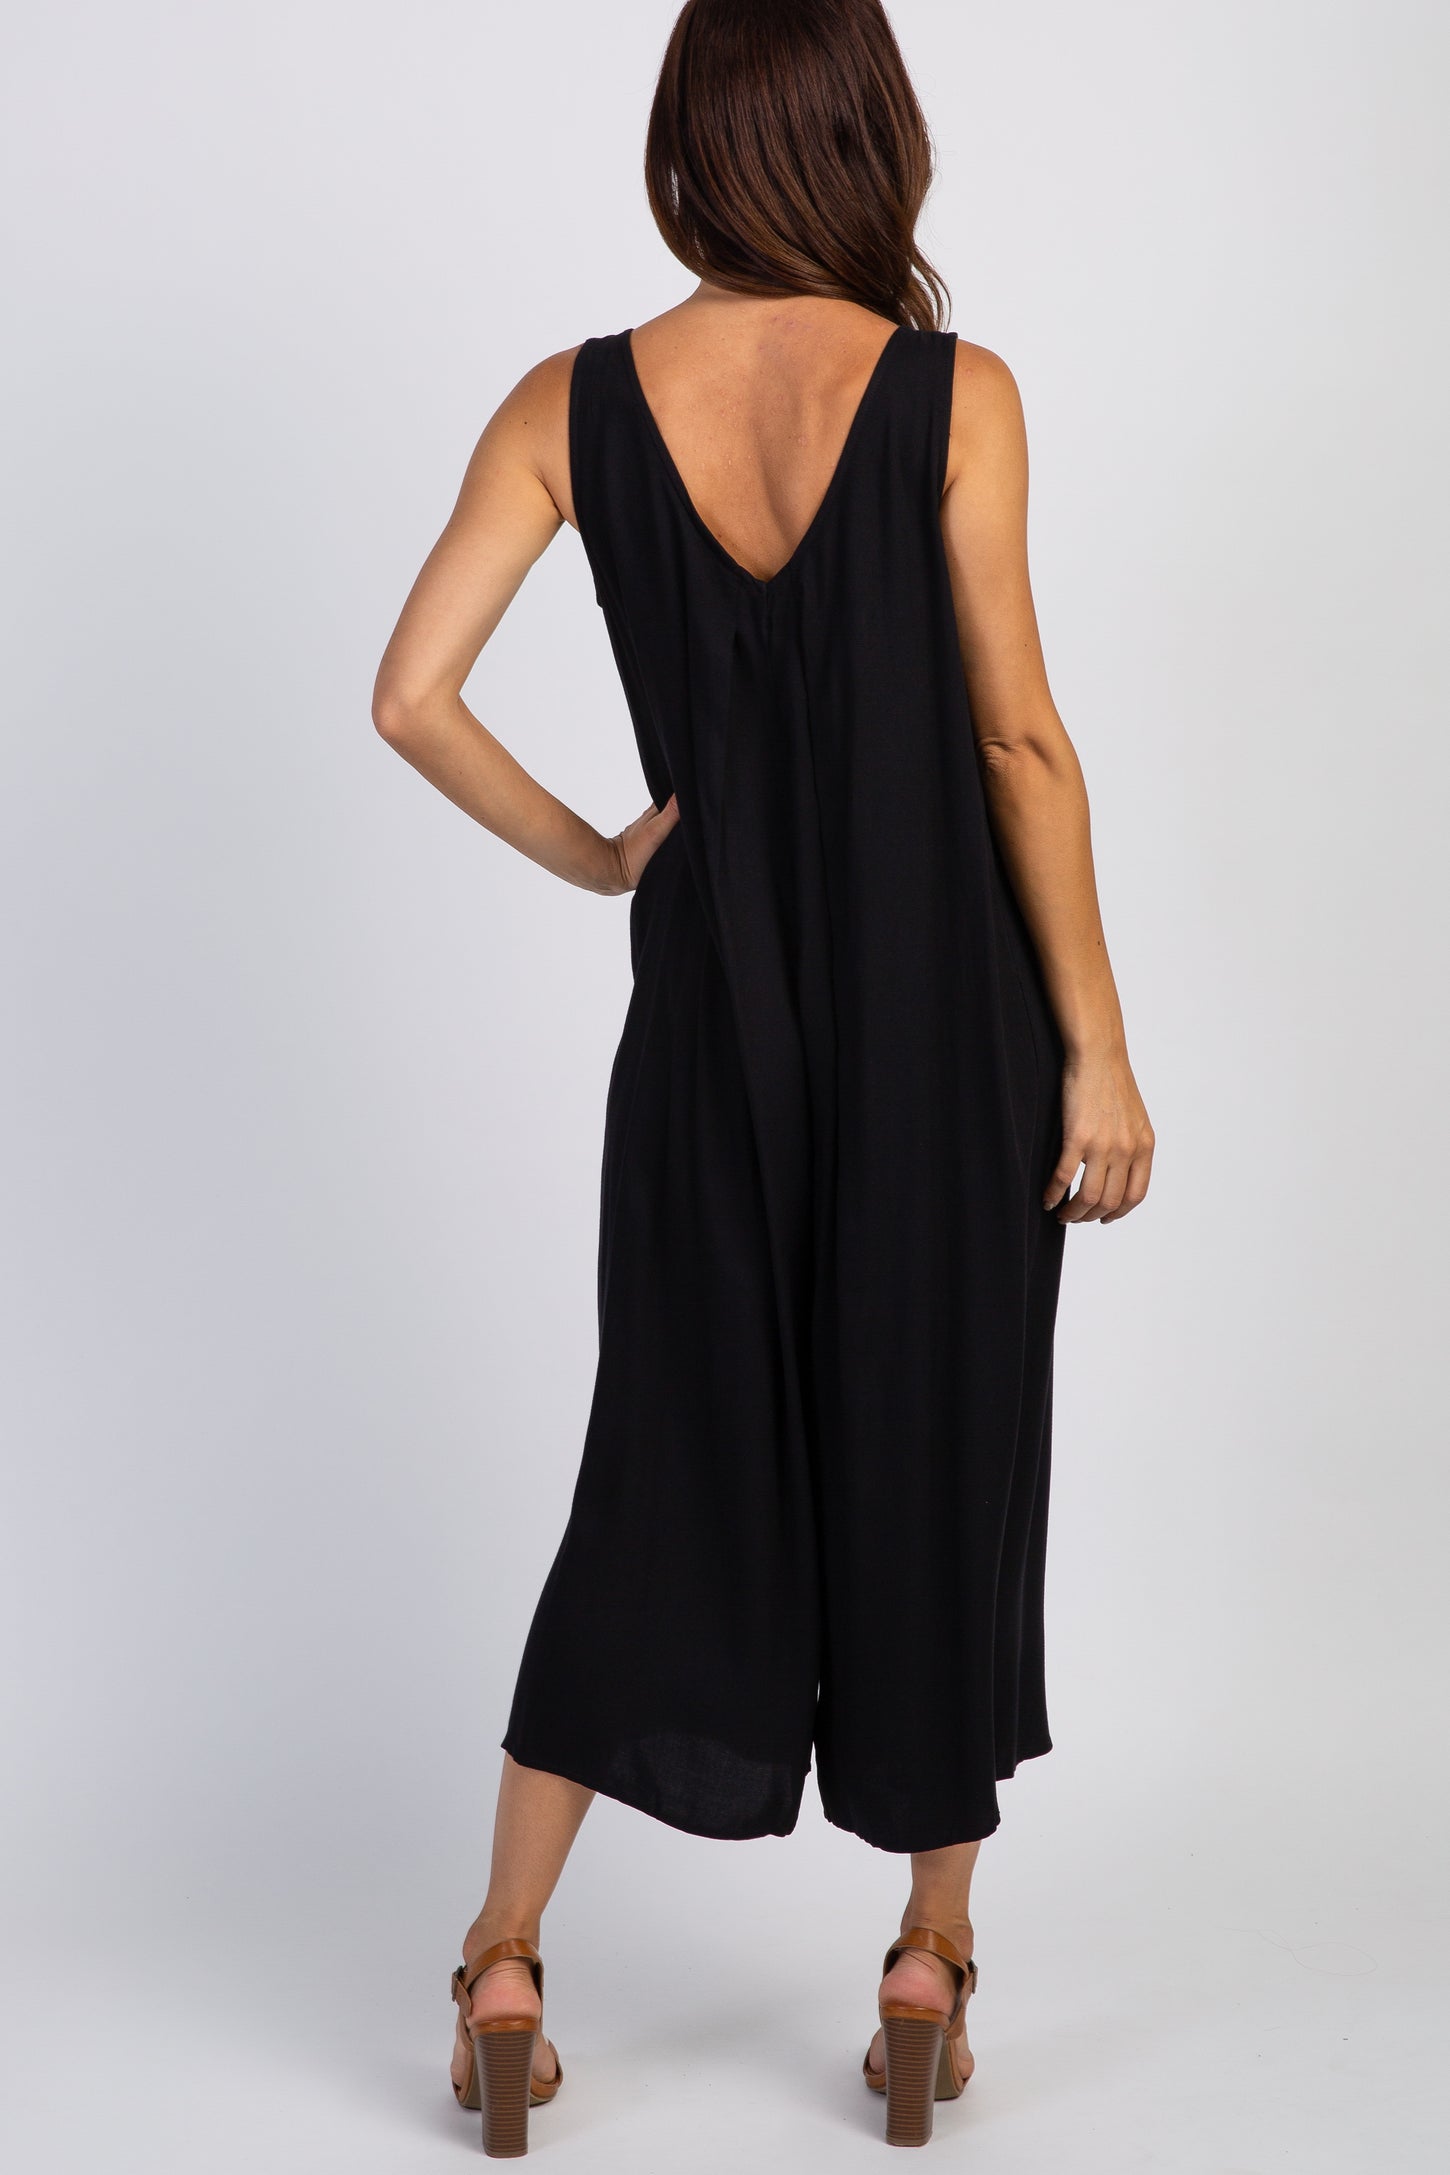 Black Sleeveless Button Front Cropped Jumpsuit